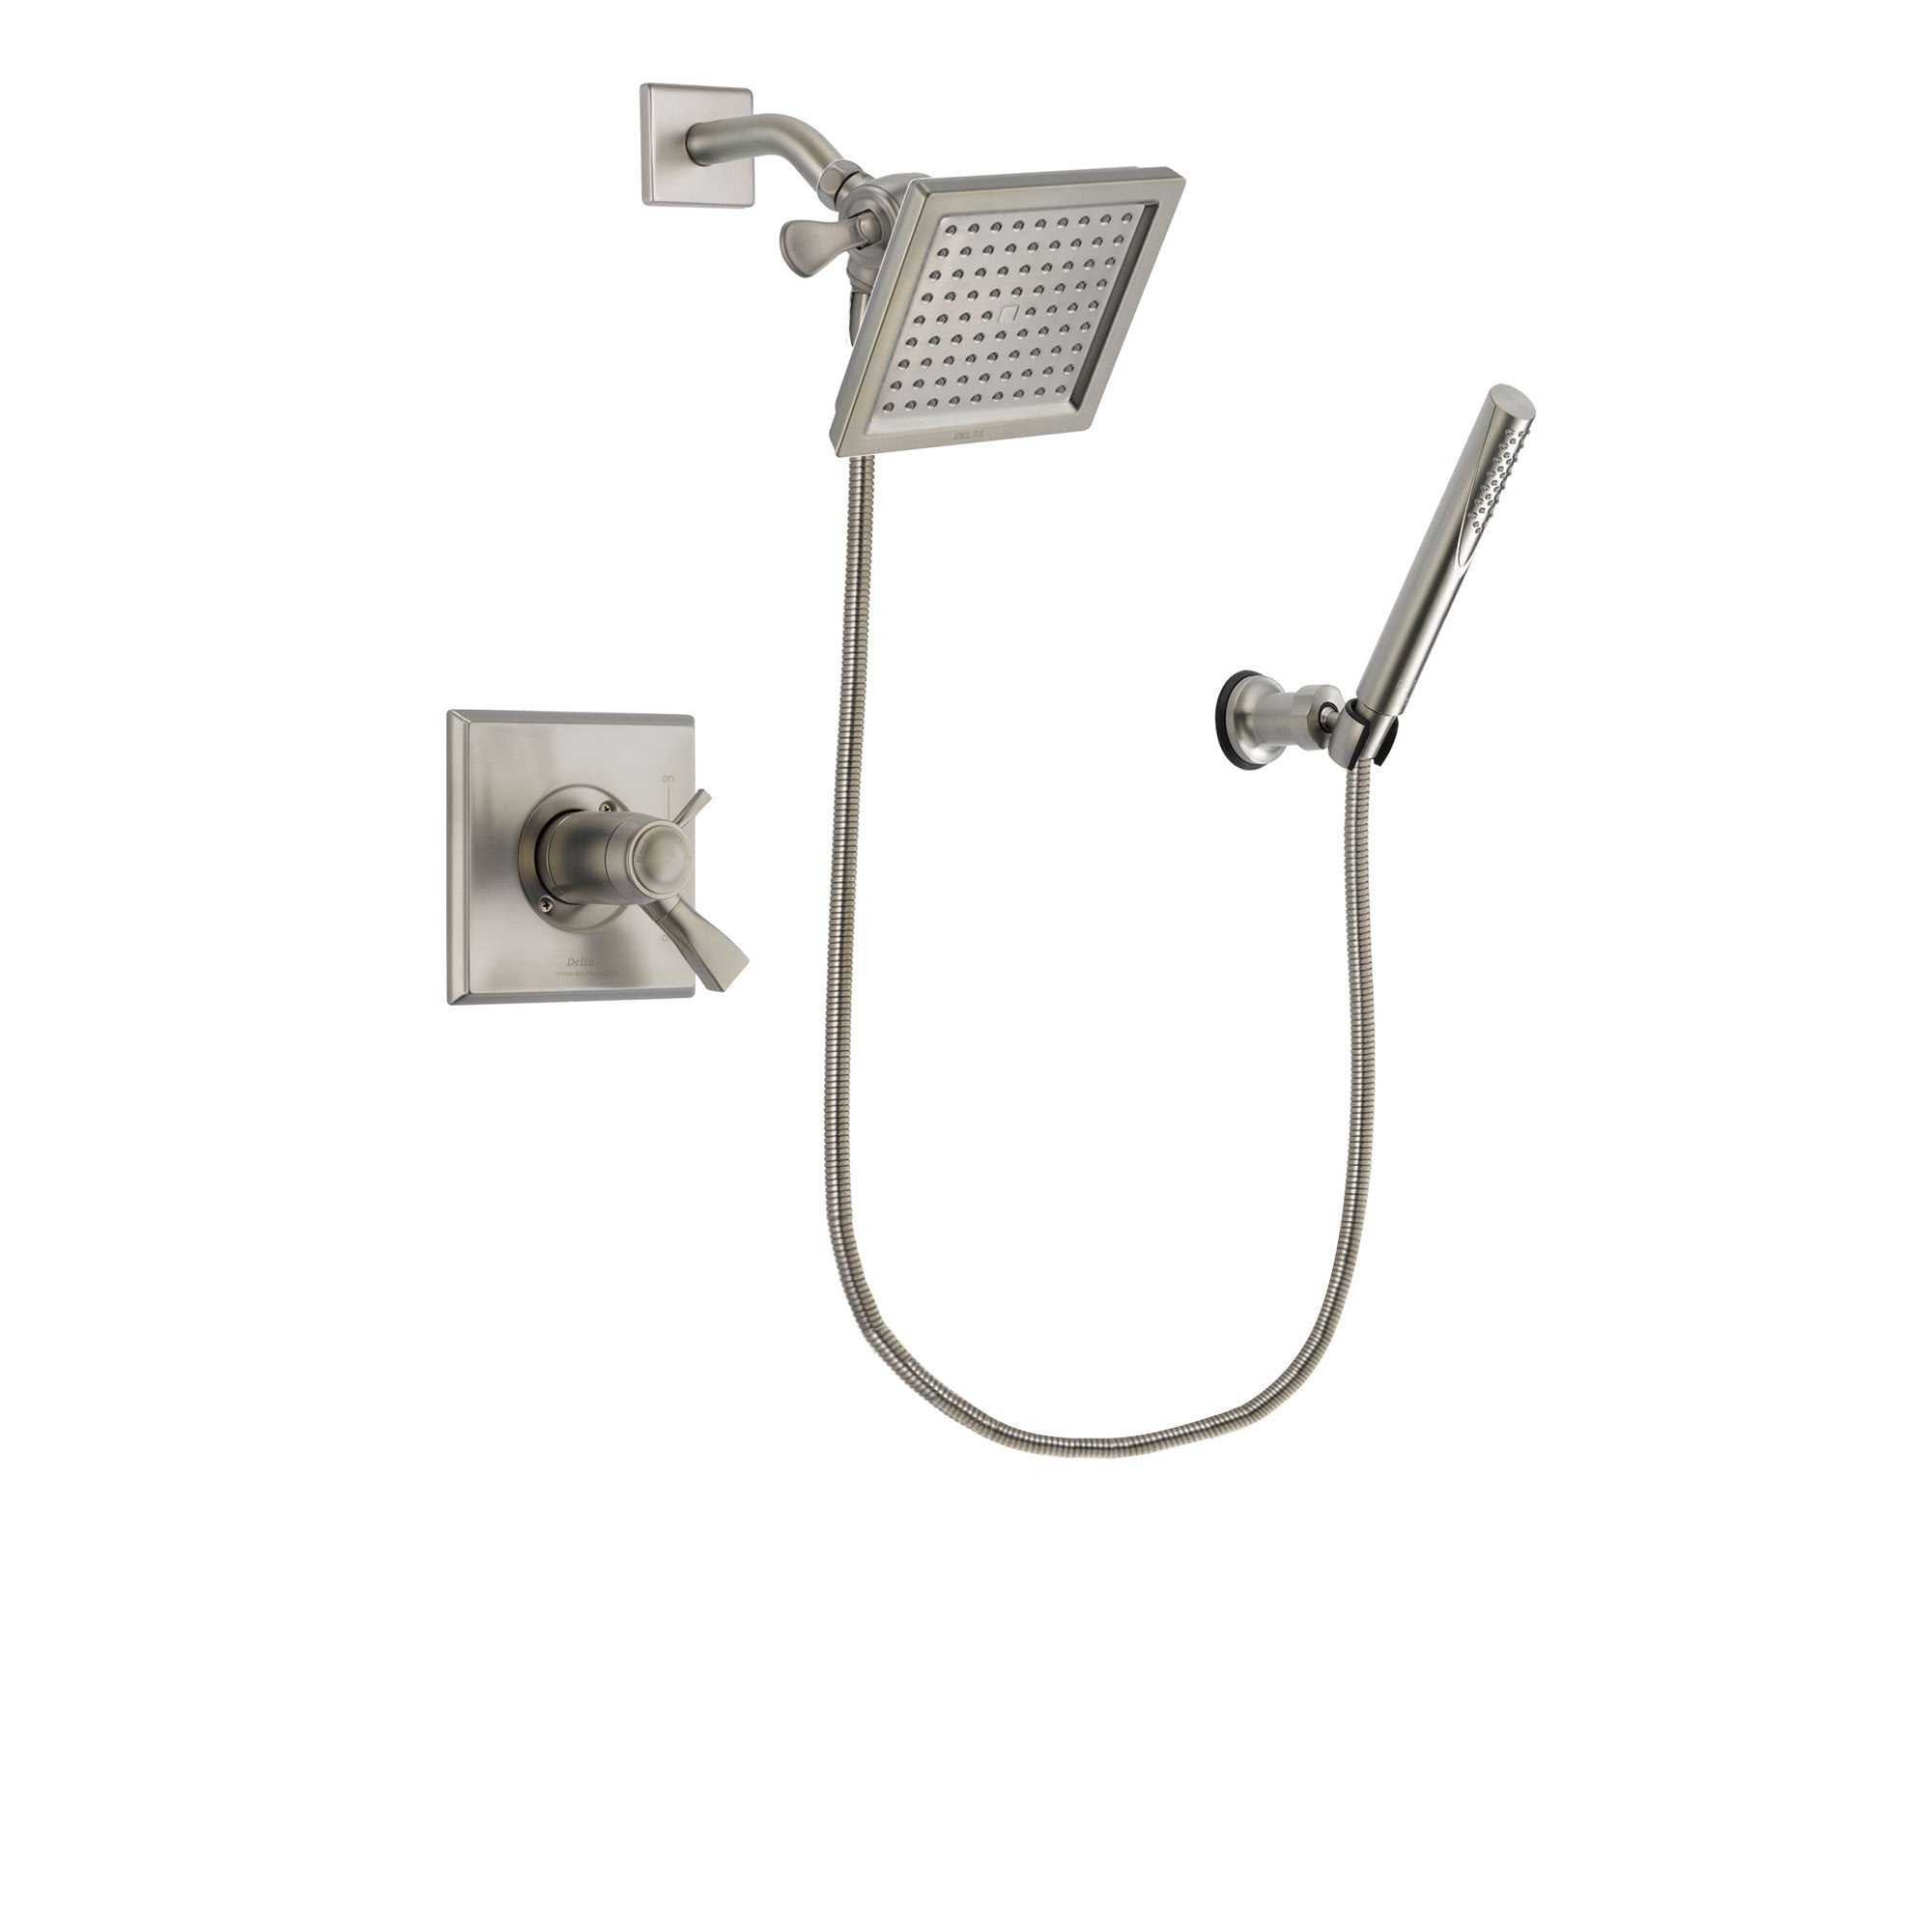 Delta Dryden Stainless Steel Finish Shower Faucet System w/ Hand Spray DSP2130V